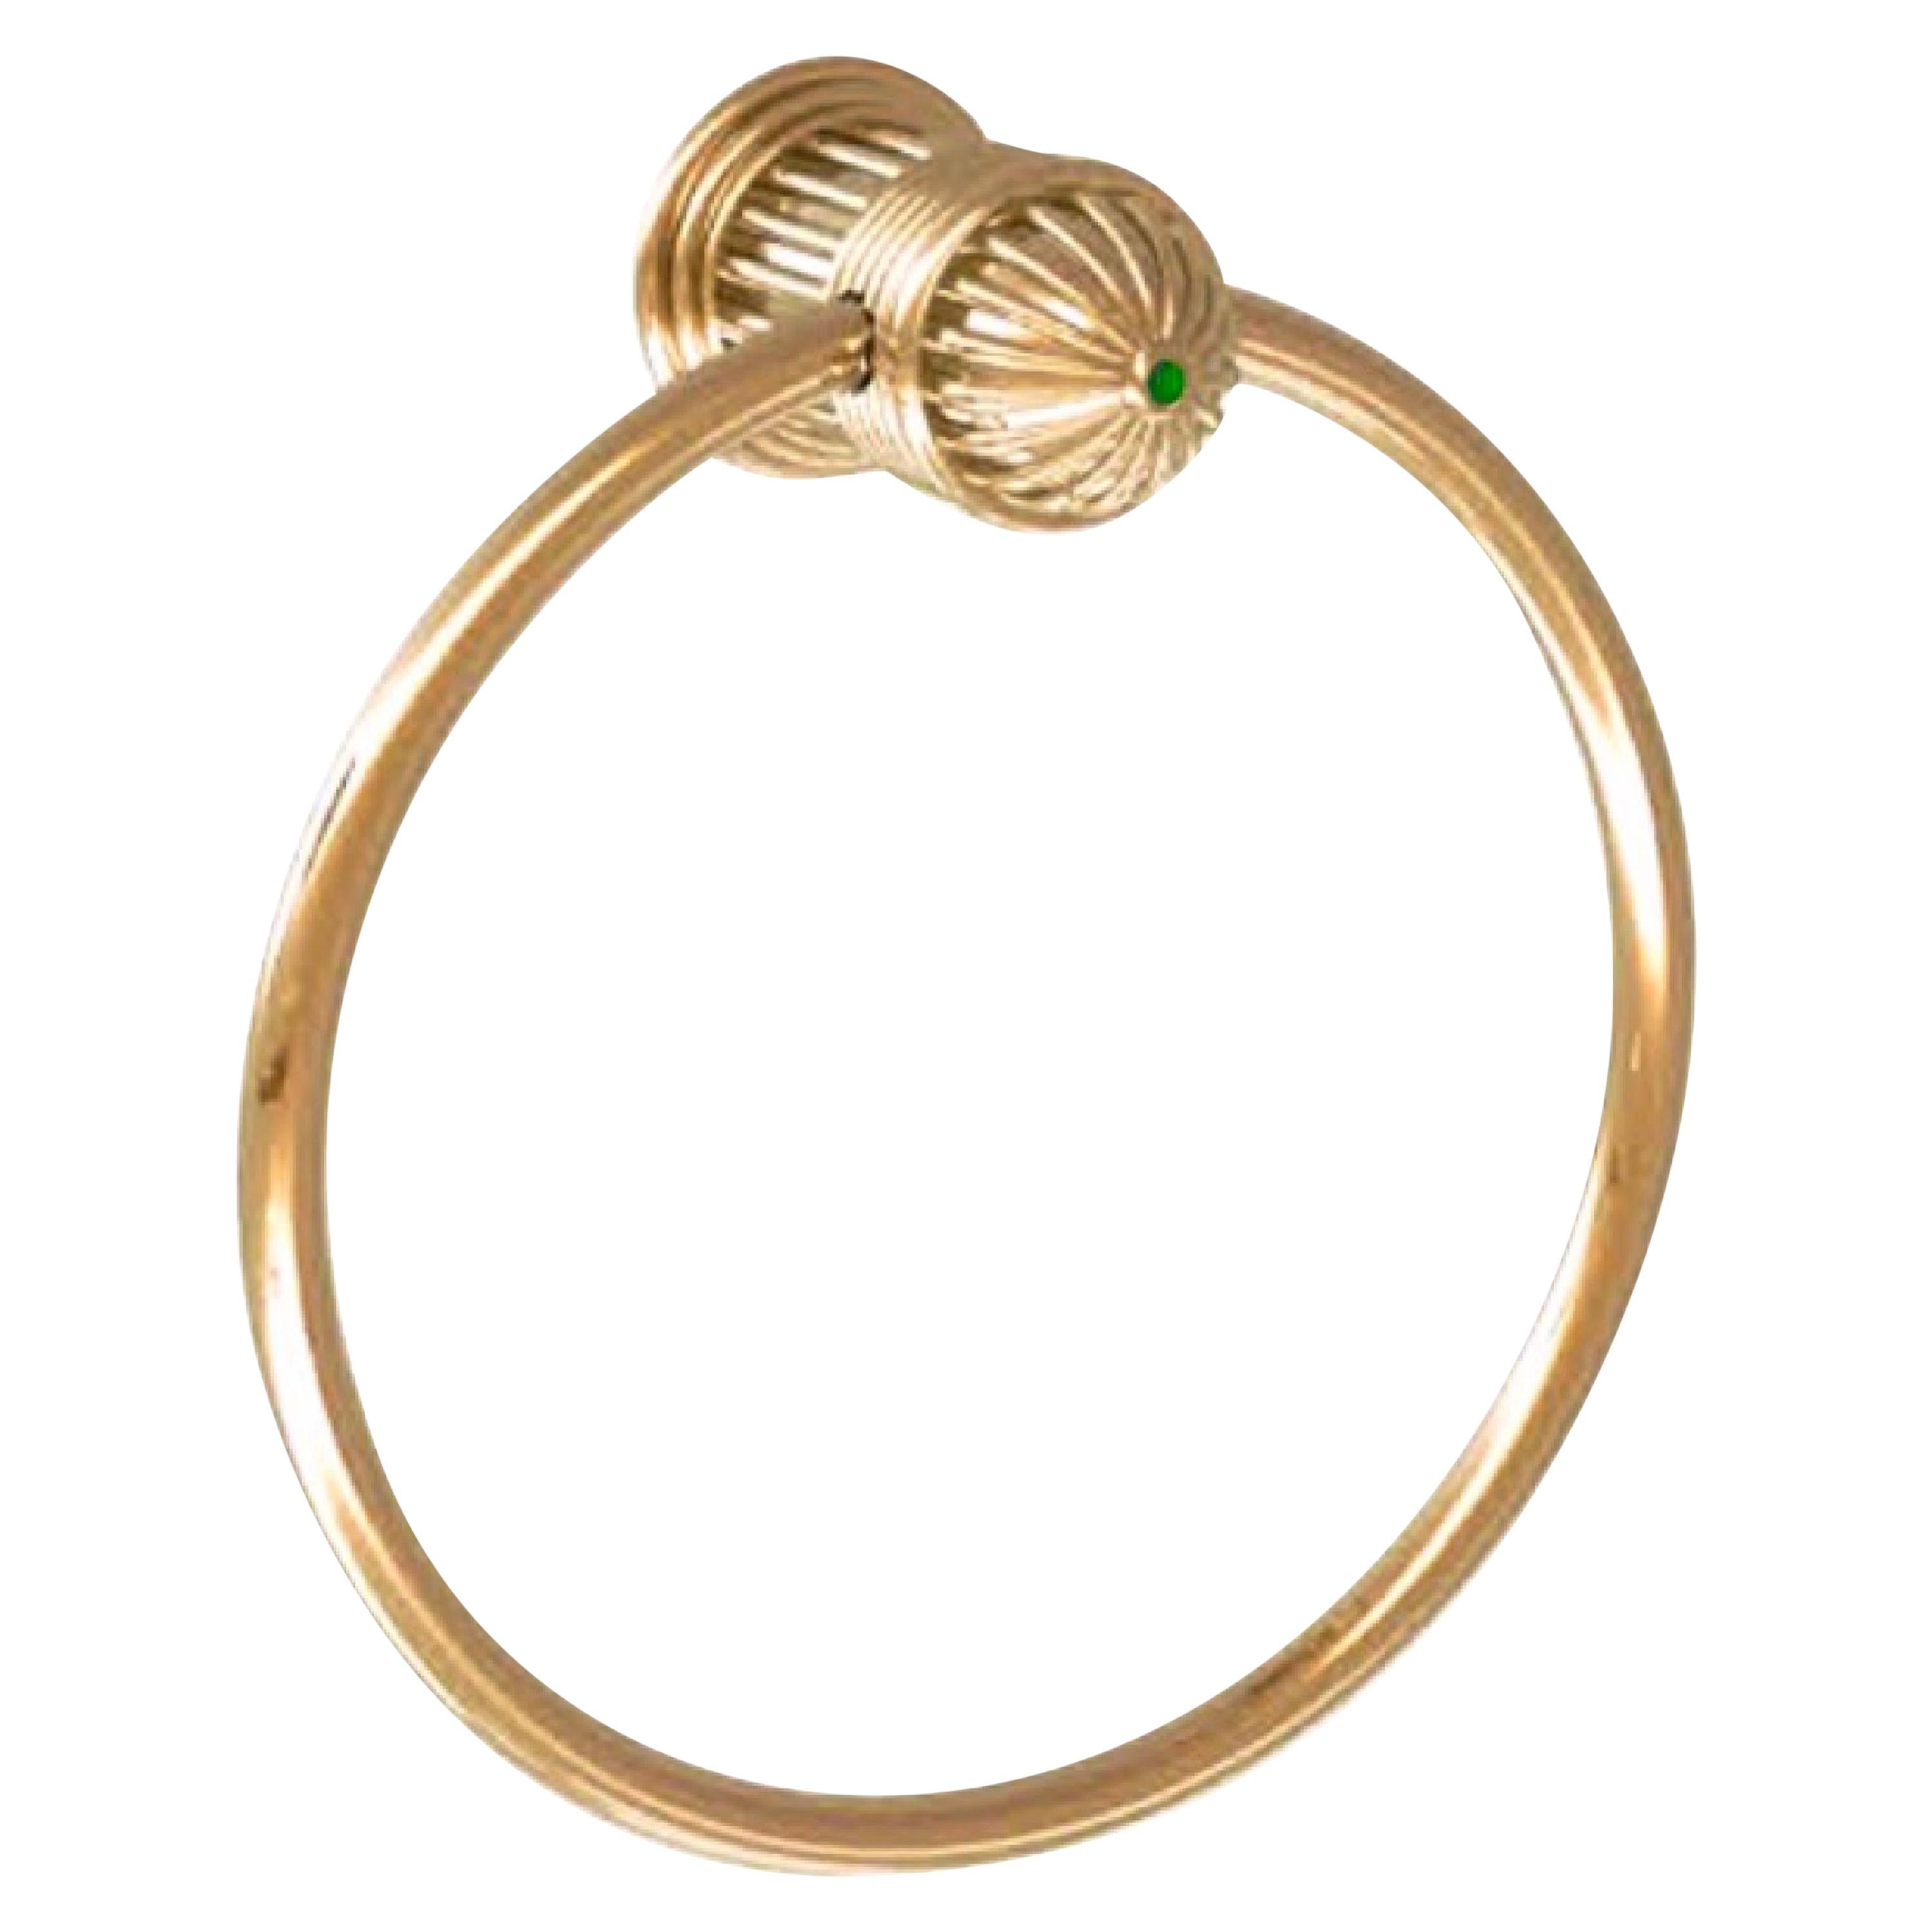 Vintage French Couture Gold and Malachite Towel Ring by Serdaneli Paris For Sale